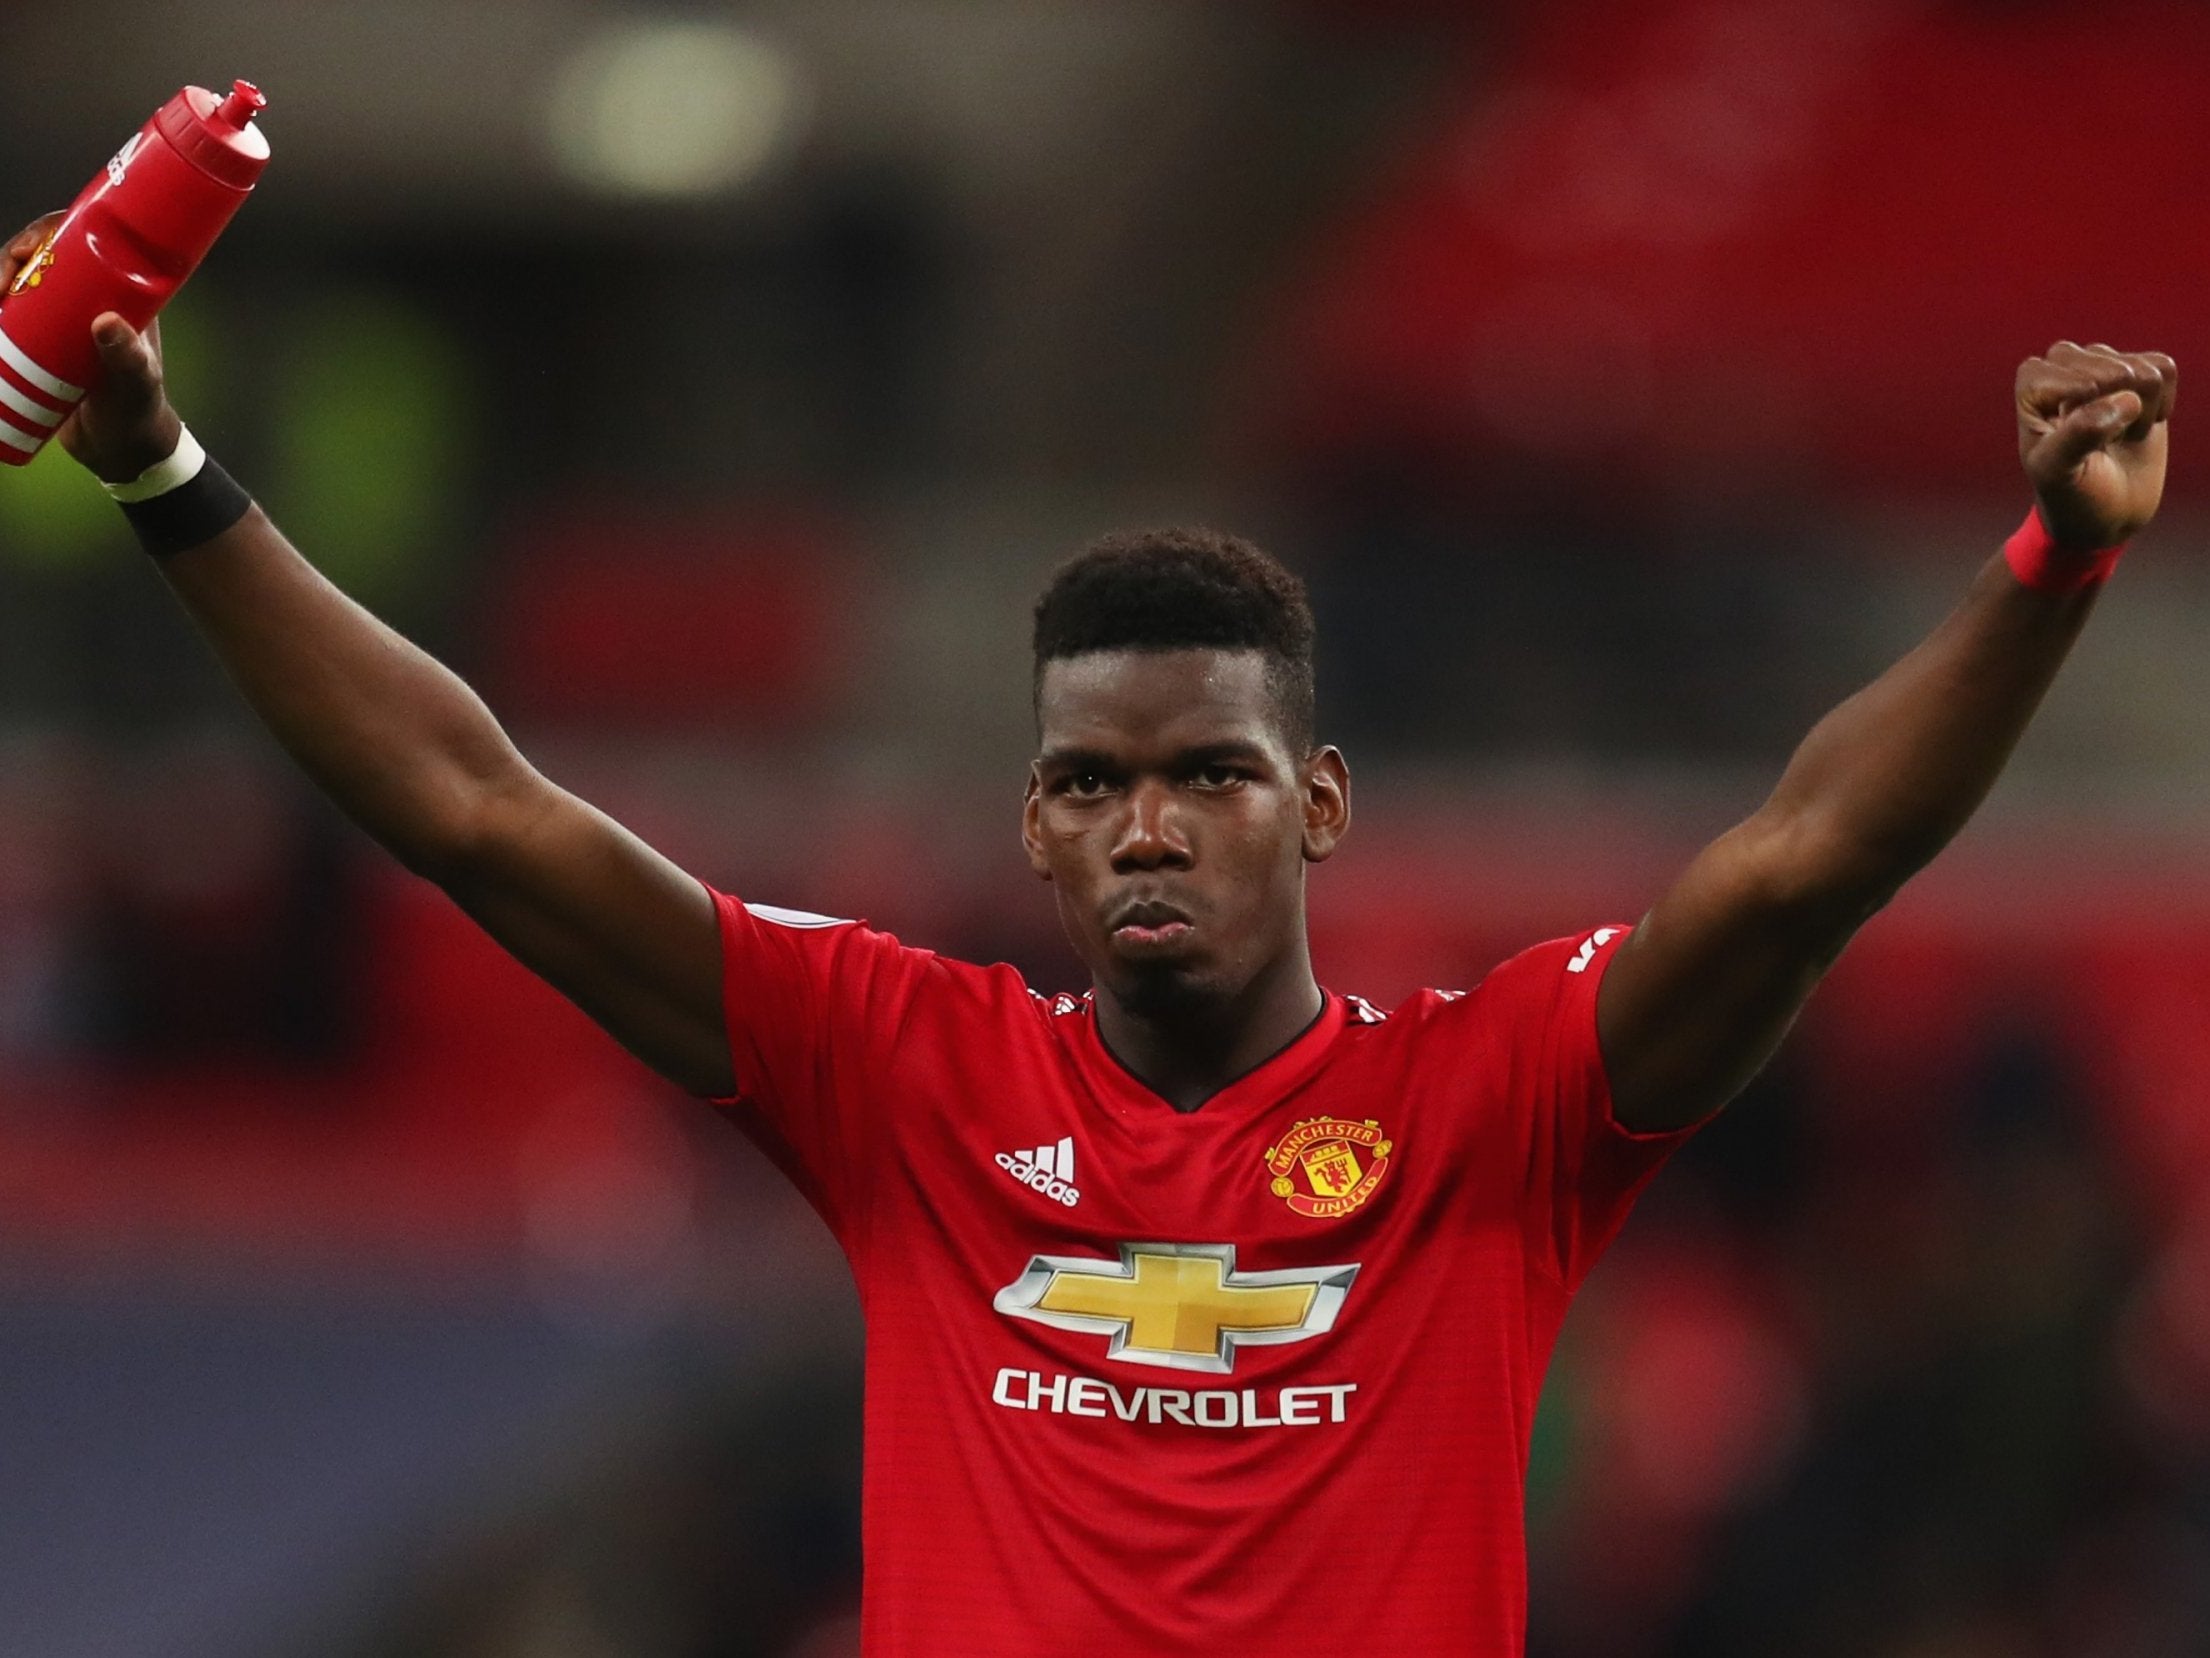 Paul Pogba looks to be back to his best